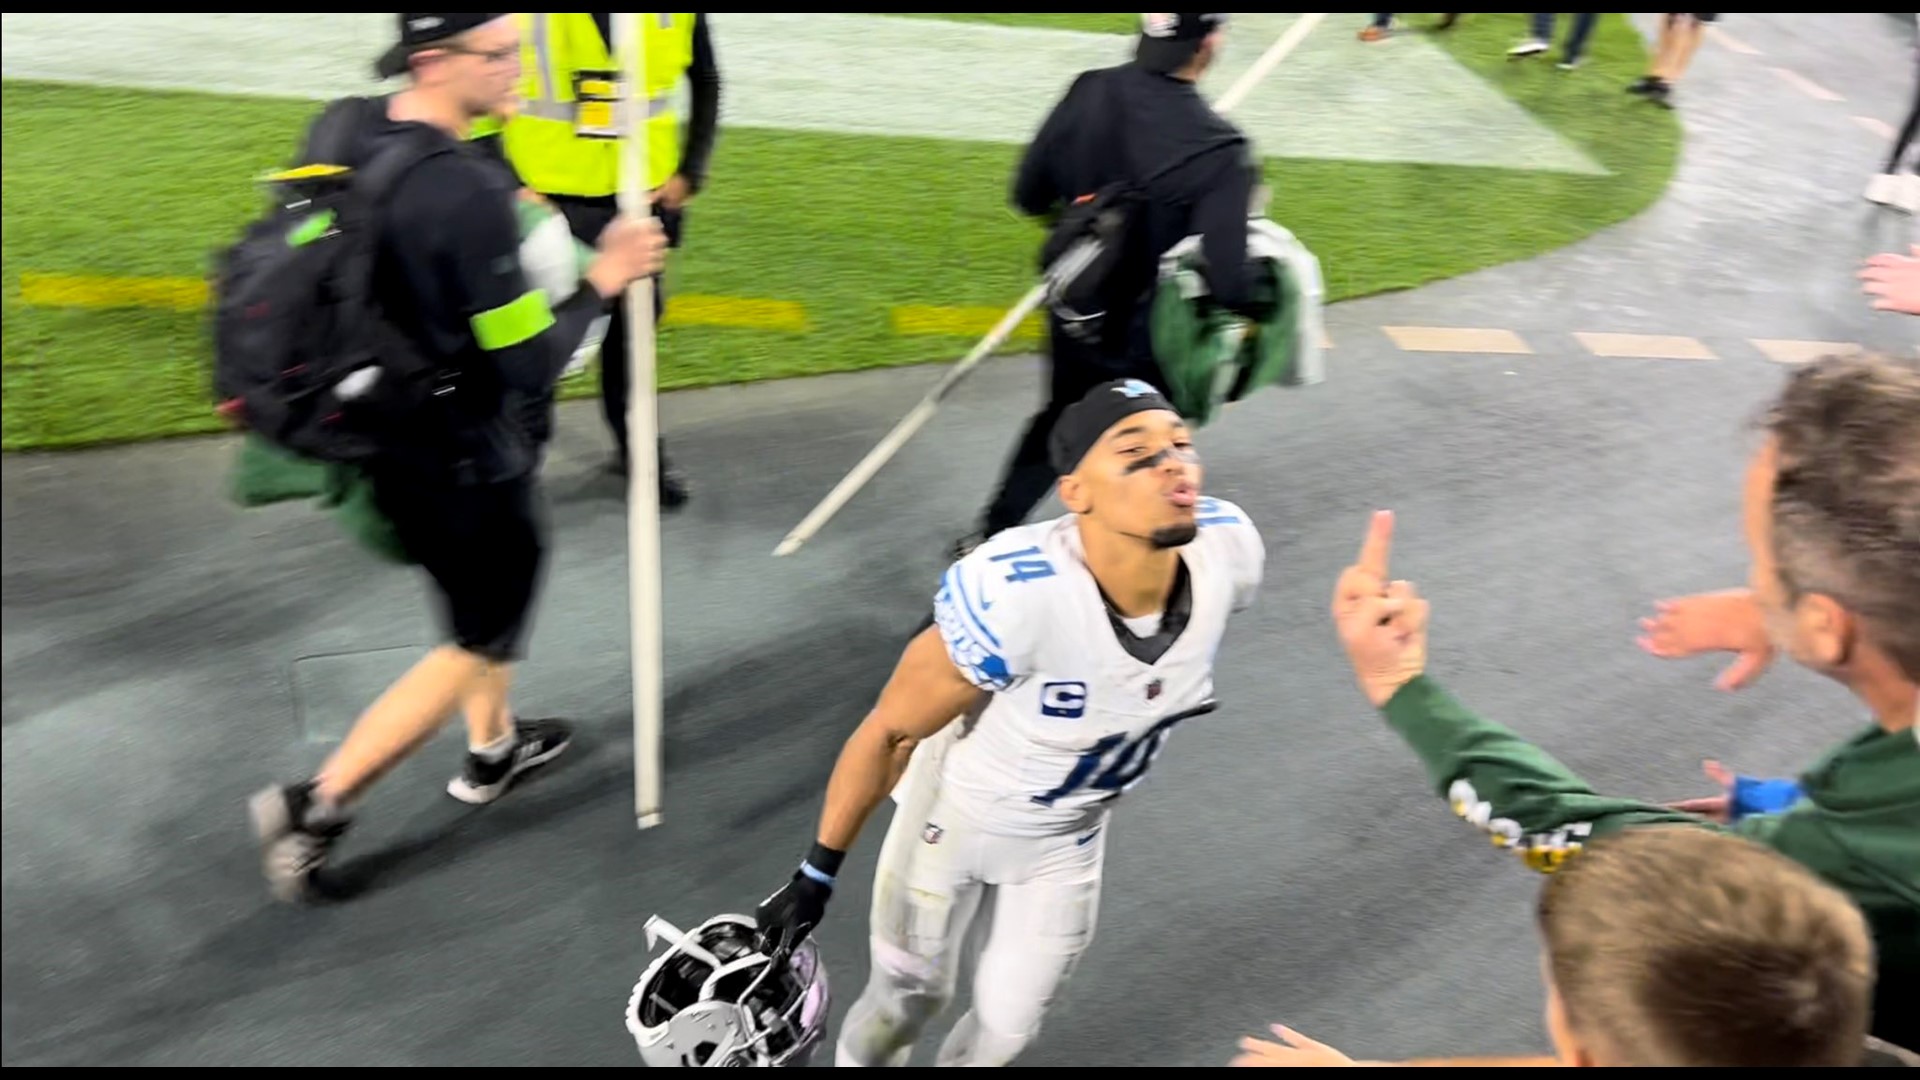 This moment between Lions WR Amon-Ra St. Brown and a Green Bay Packers fan following Detroit's 34-20 win was captured by a West Michigan native.